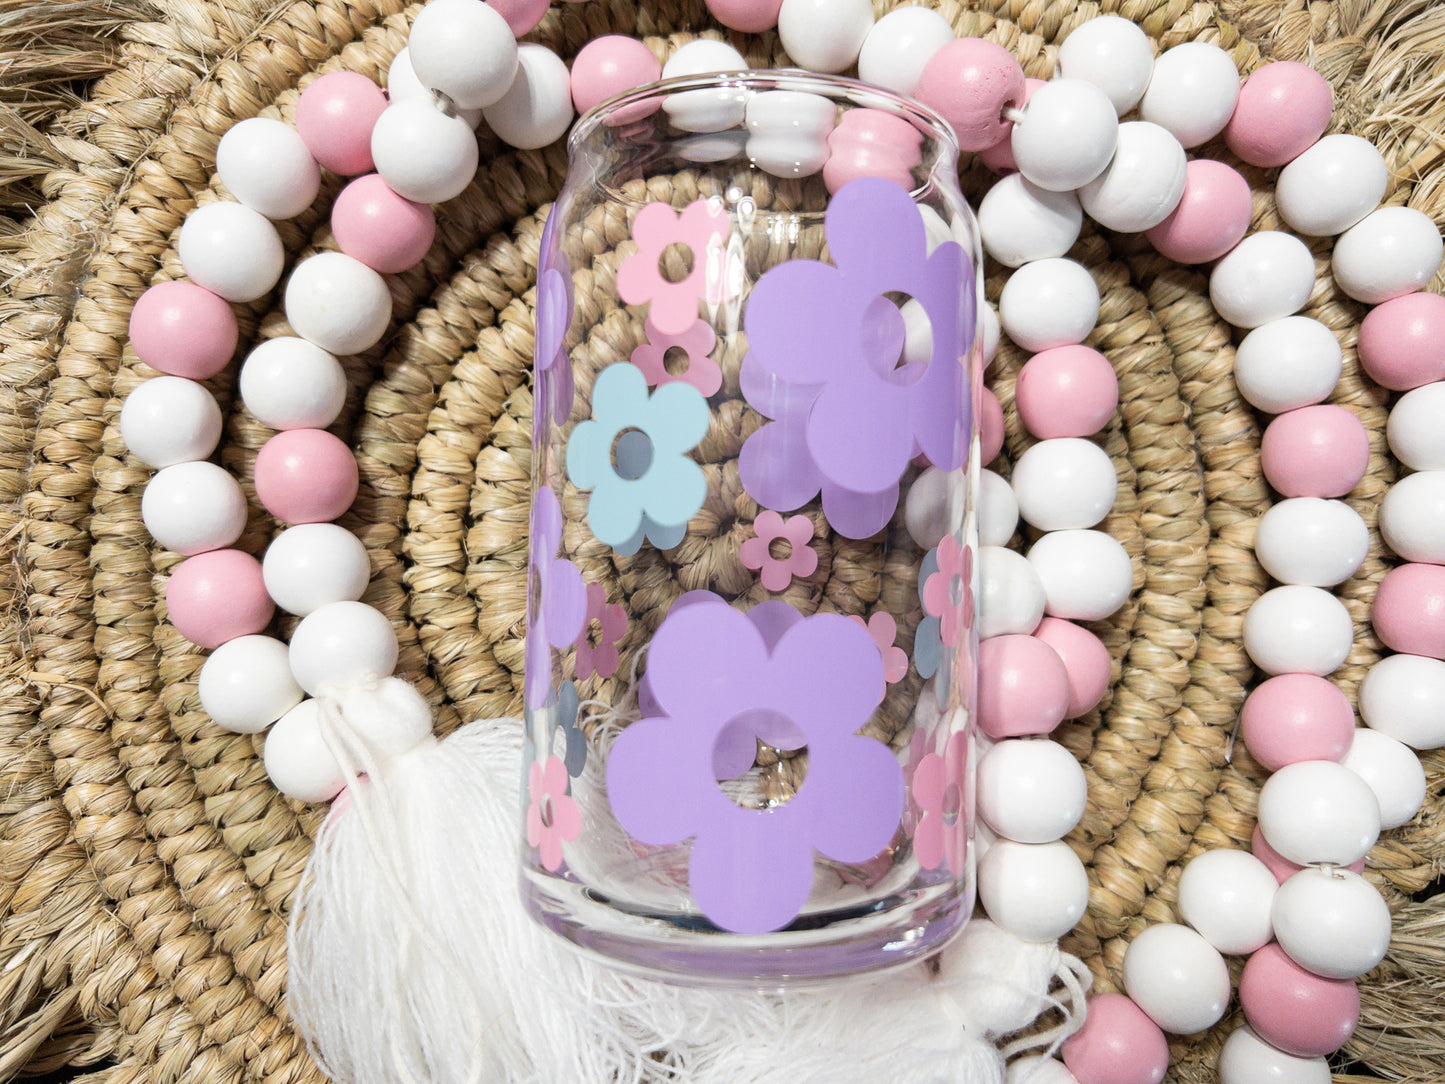 Retro Flower Pastel Color Glass Can